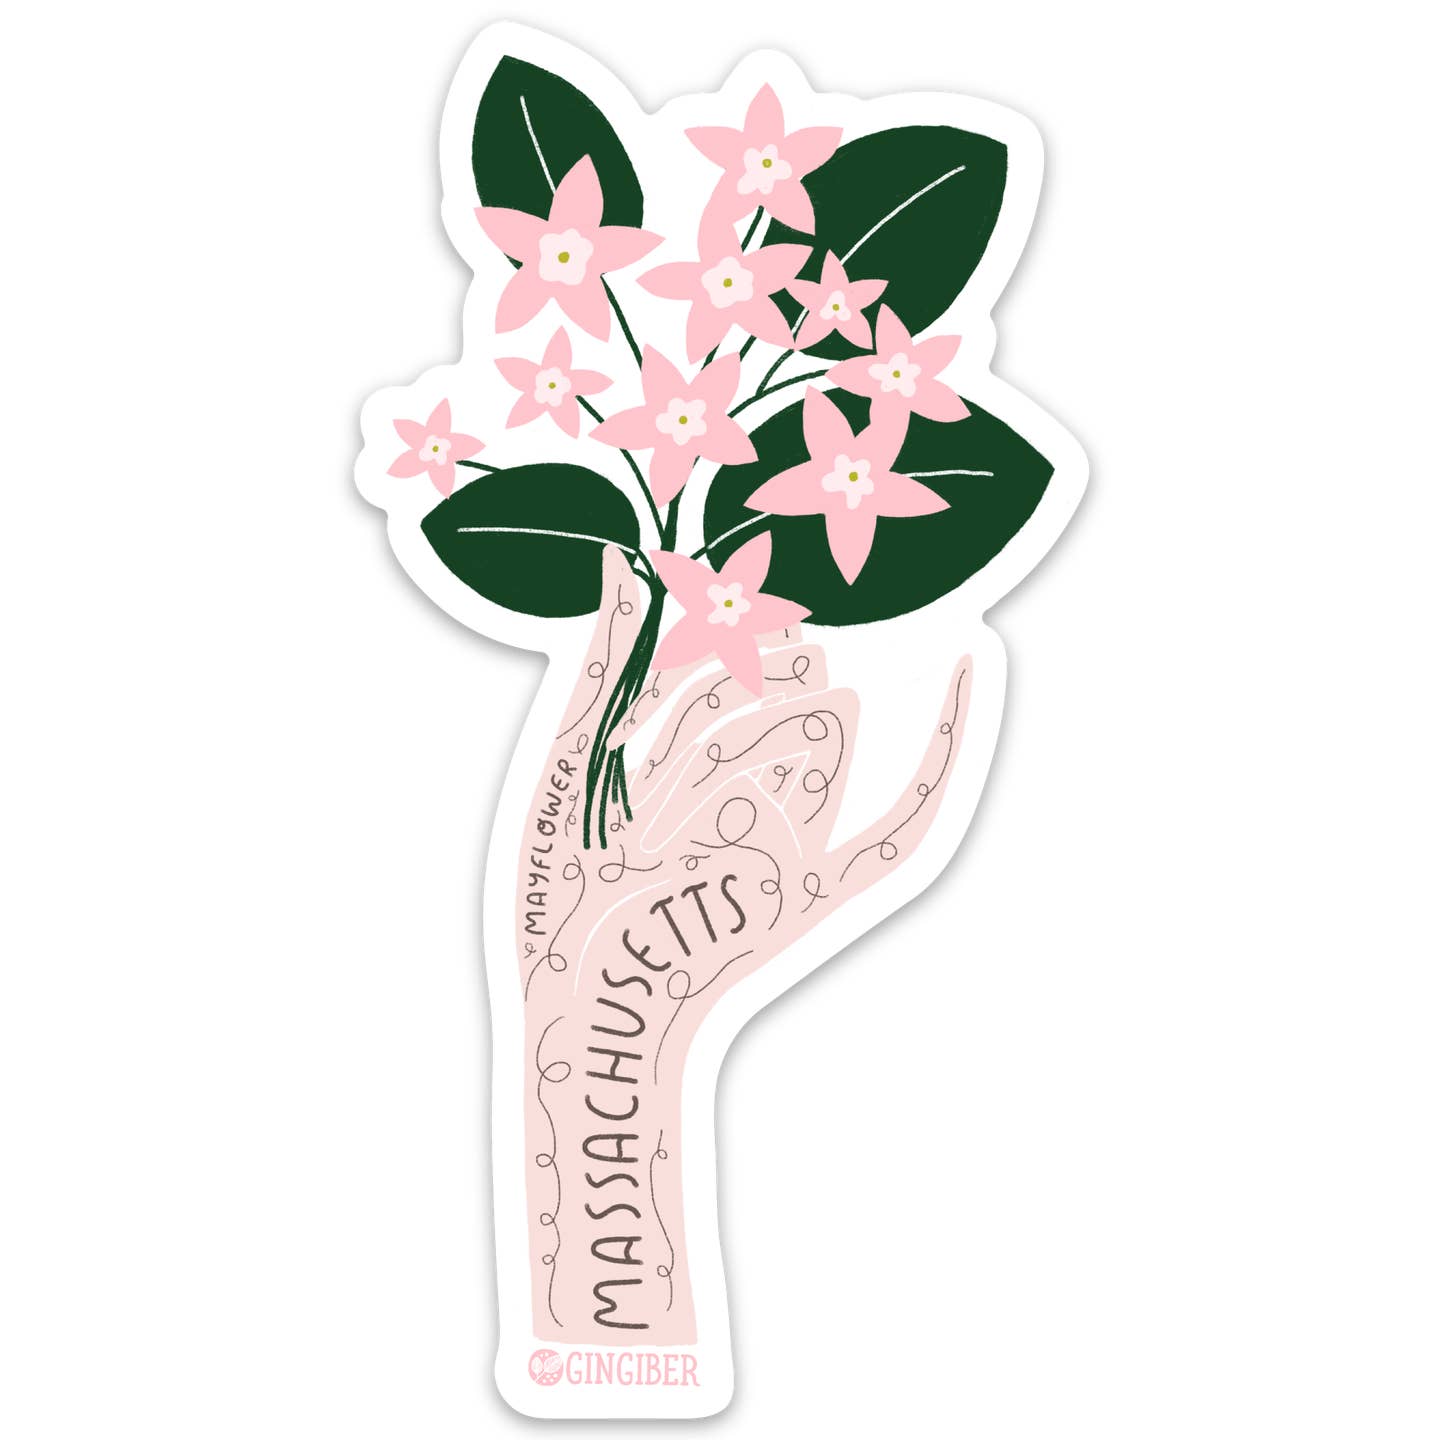 Sticker with white background and image of pink hand holding a bunch of pink mayflowers with green leaves and stems and black text says, "Masachusetts Mayflower". 